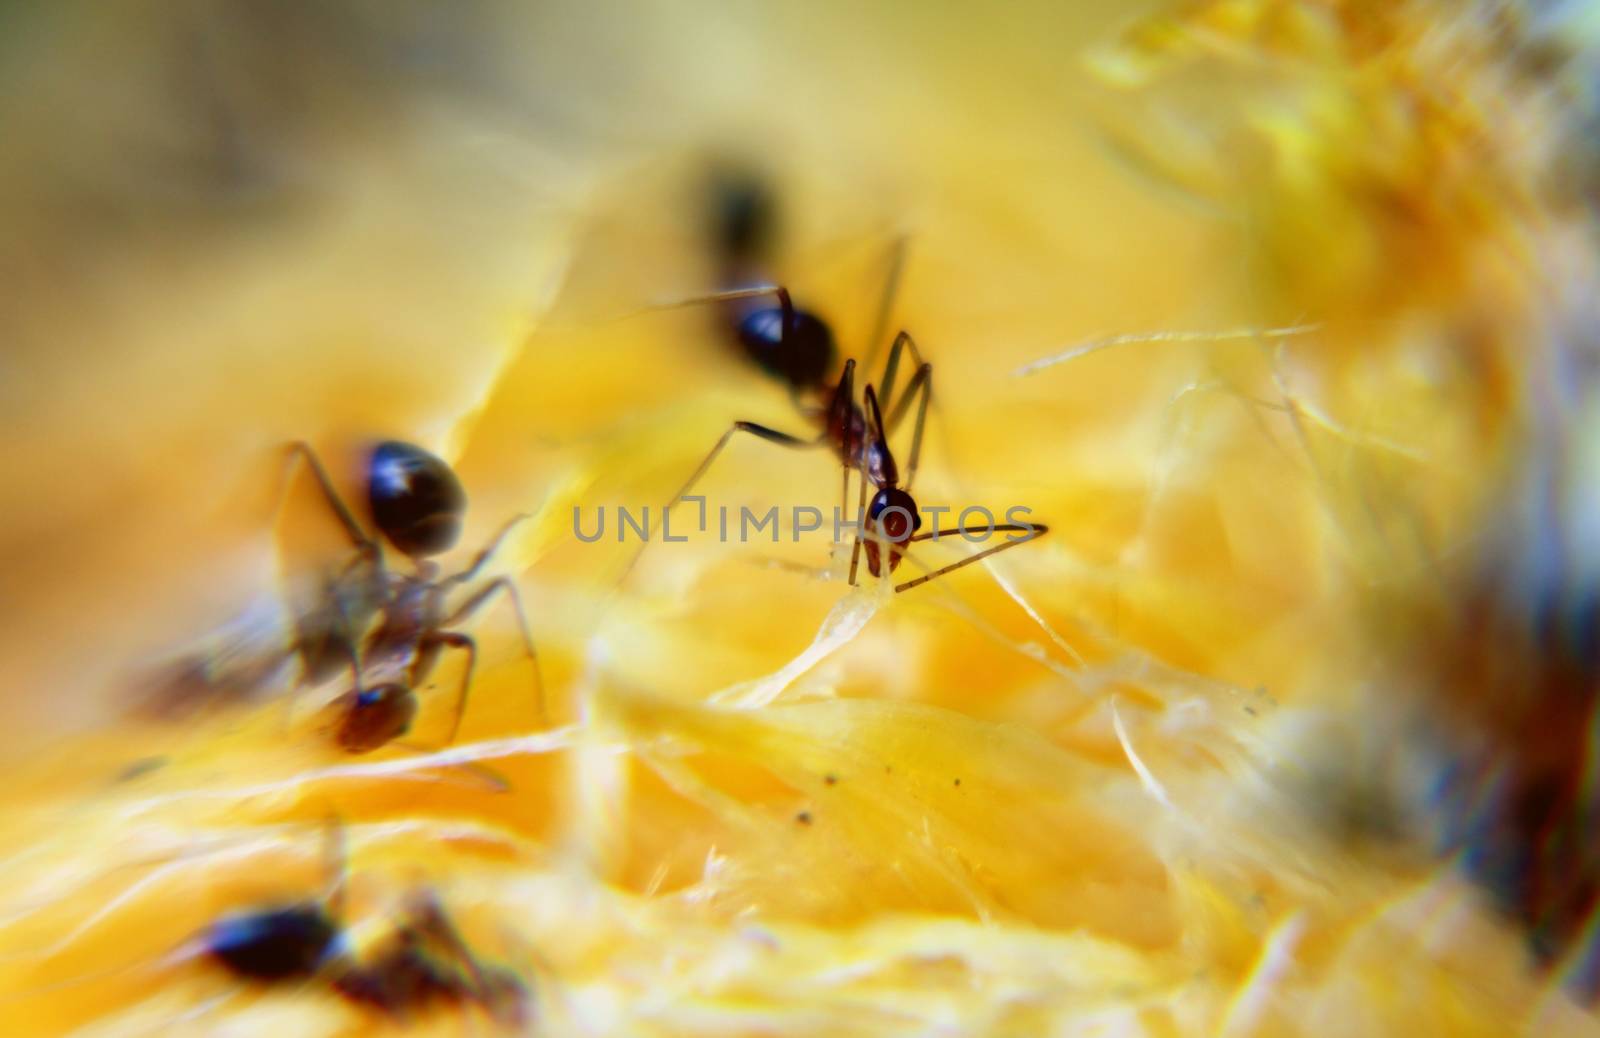 Ants swarming for food from ripe fruit